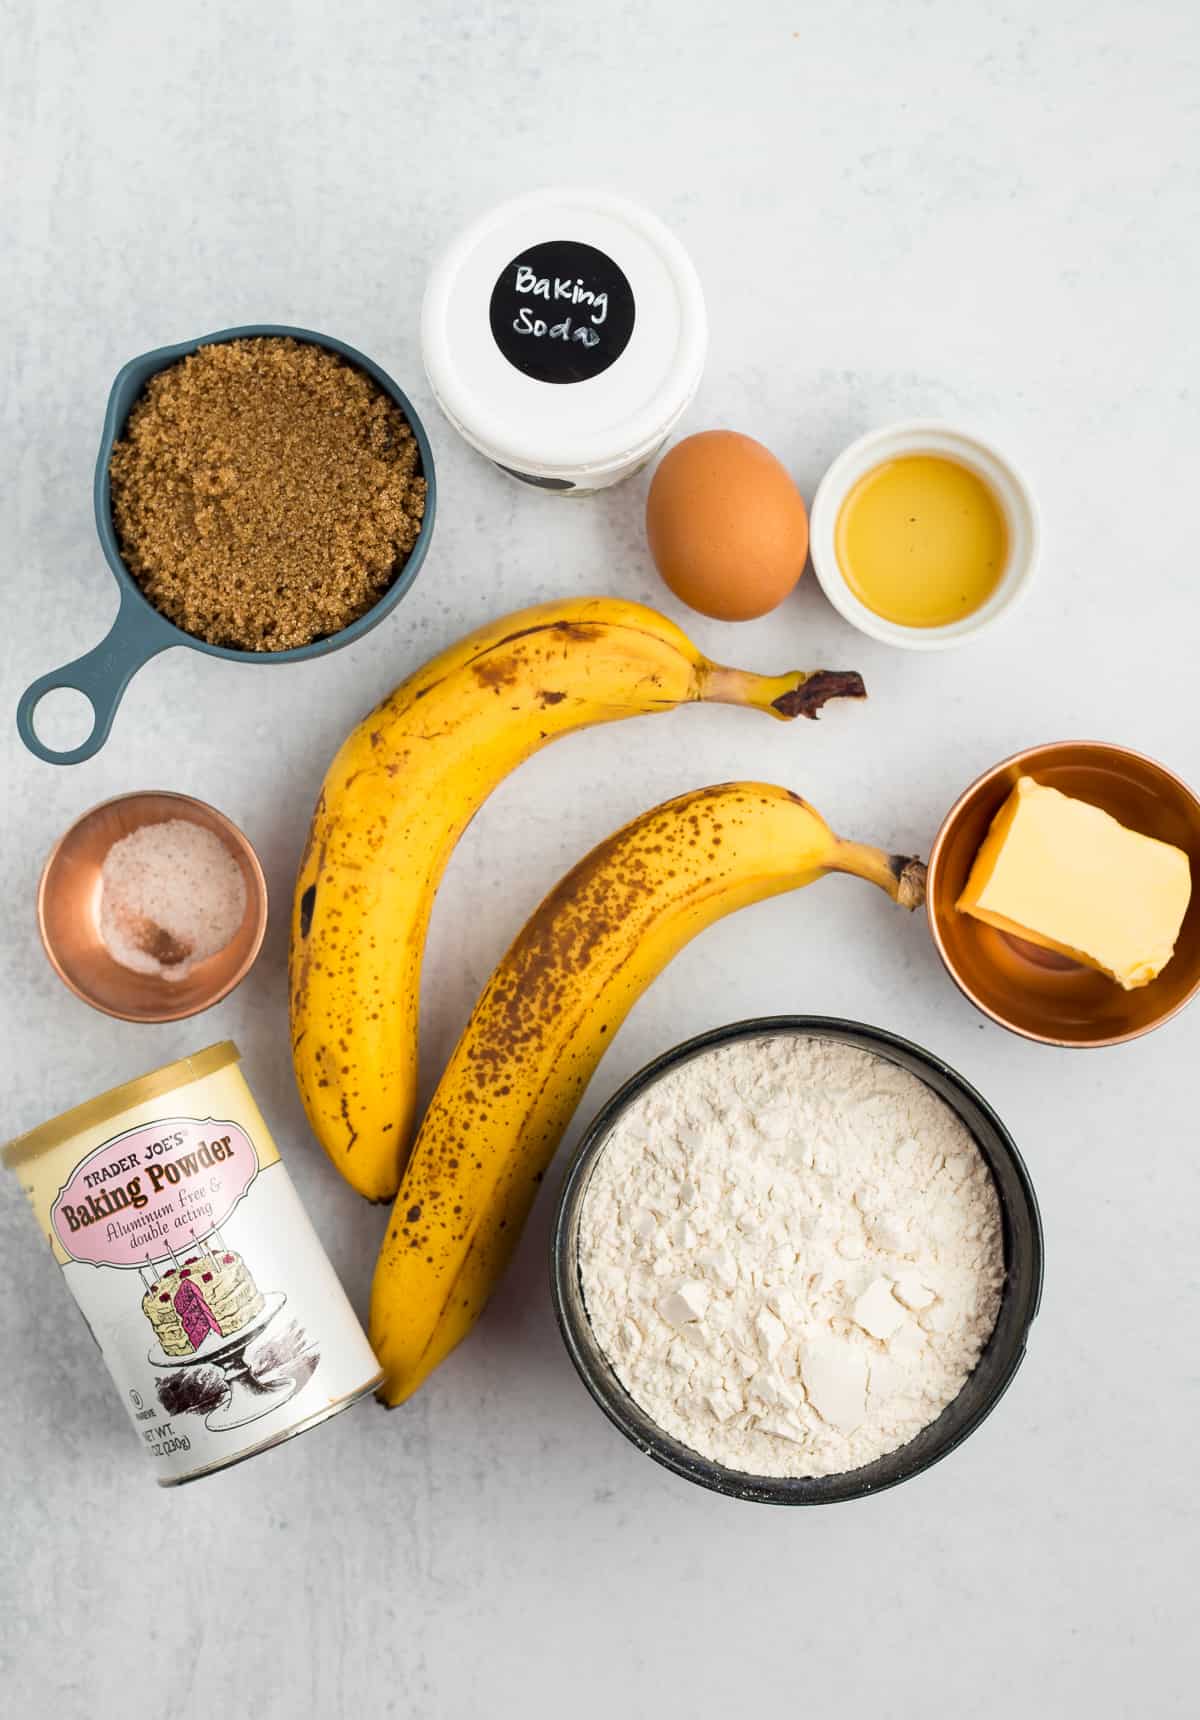 bananas, butter, an egg, brown sugar, and other ingredients for making quick bread.